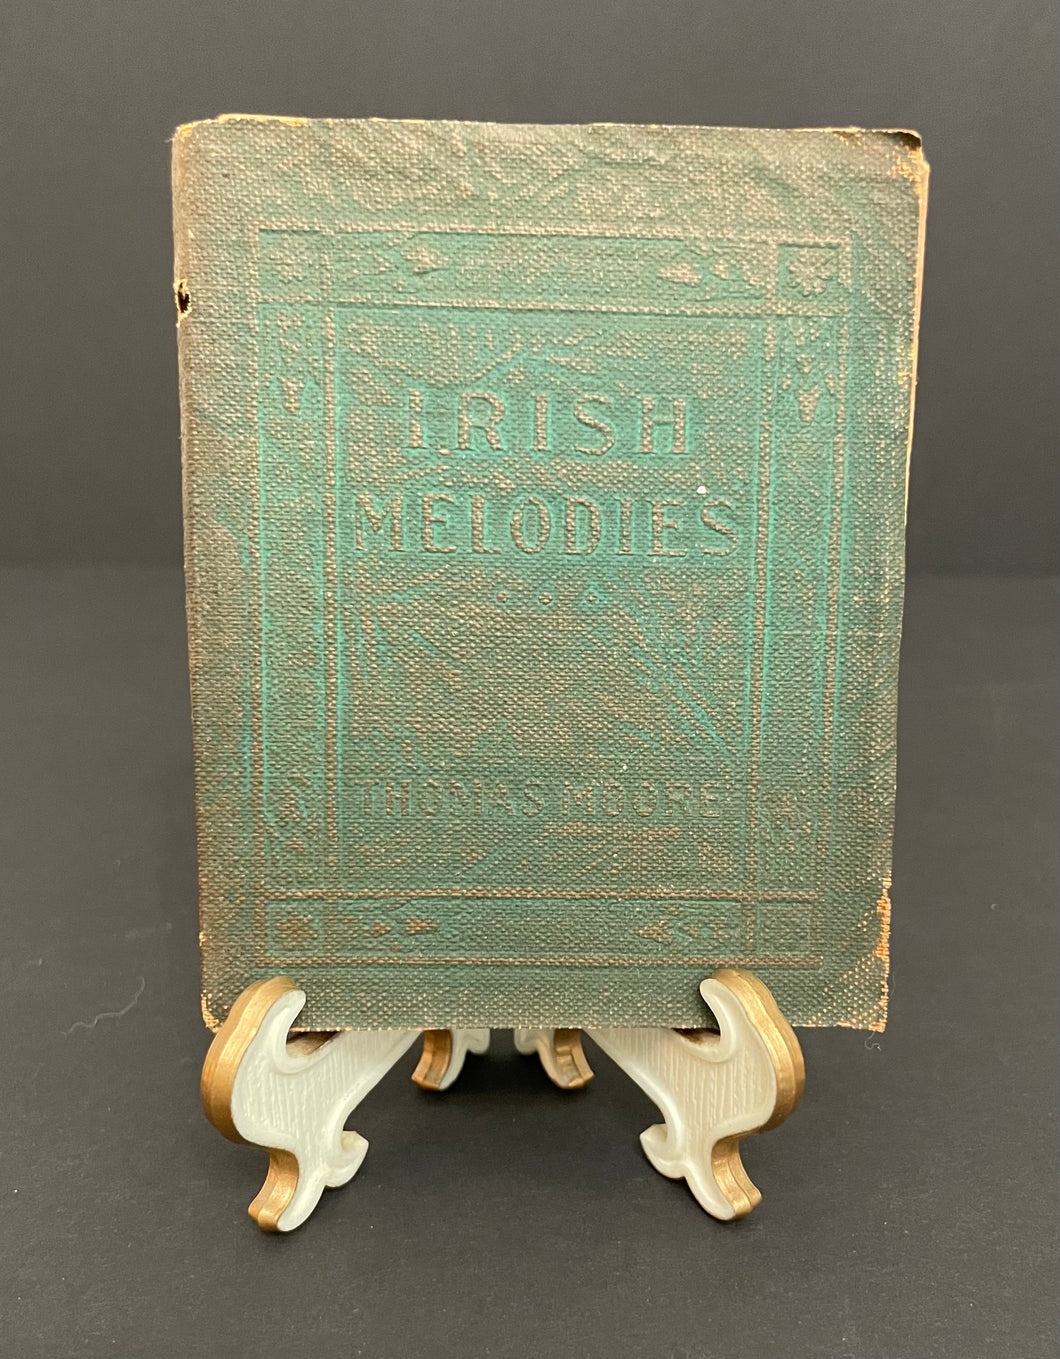 Antique Little Leather Library “Irish Melodies” by Sir Thomas Moore